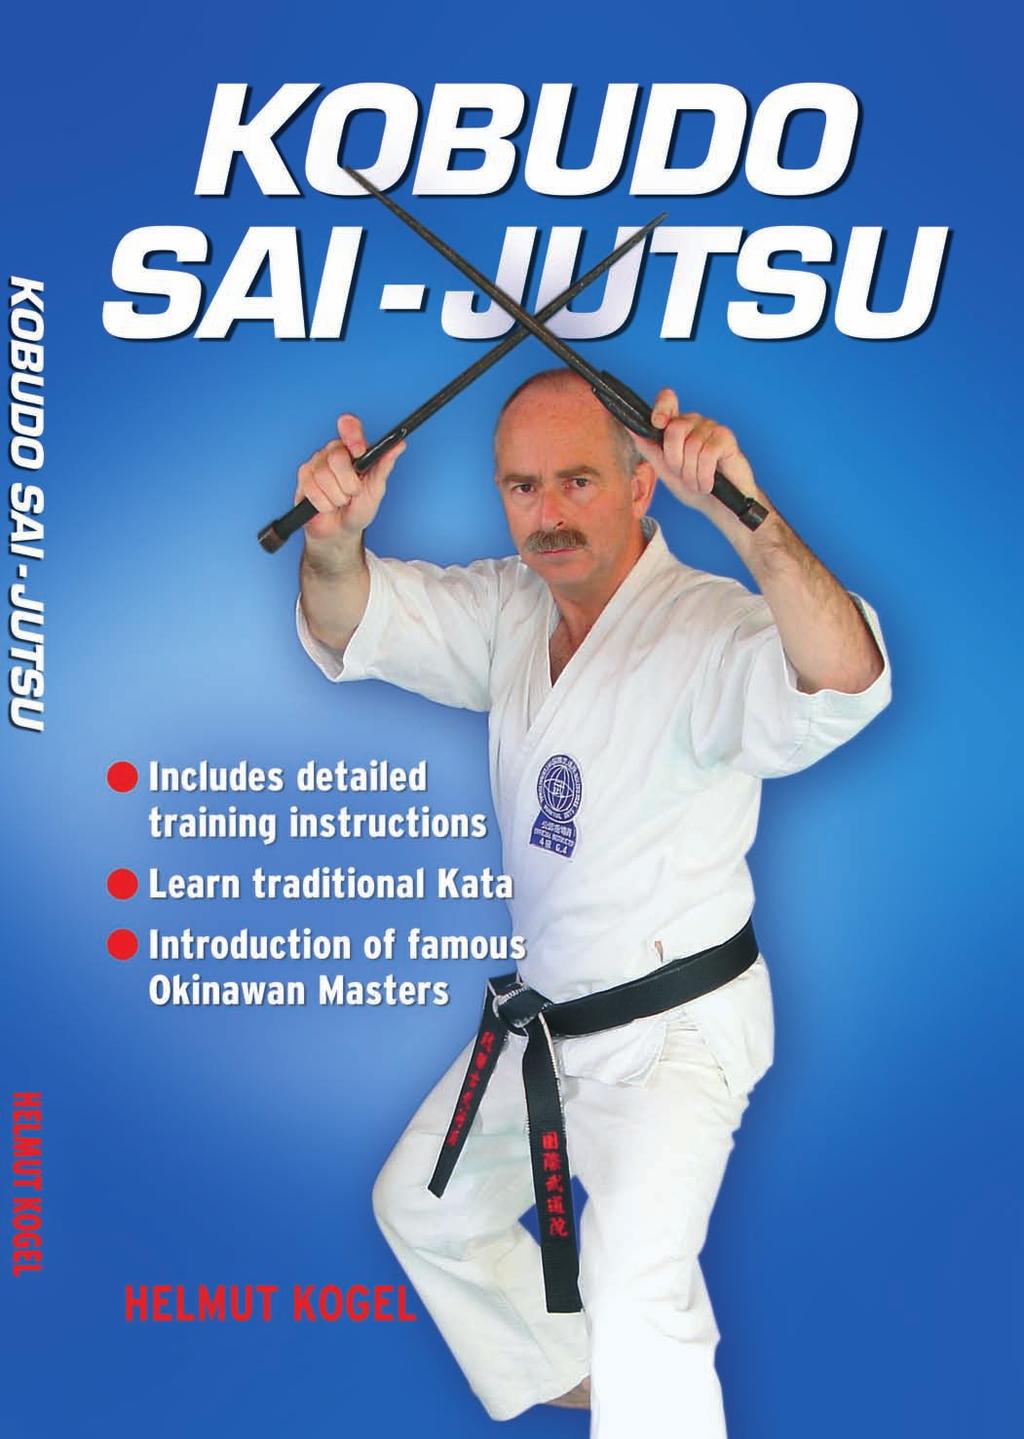 In this book, the beginner will find a systematic introduction into the basics of Sai-Jutsu fighting techniques.